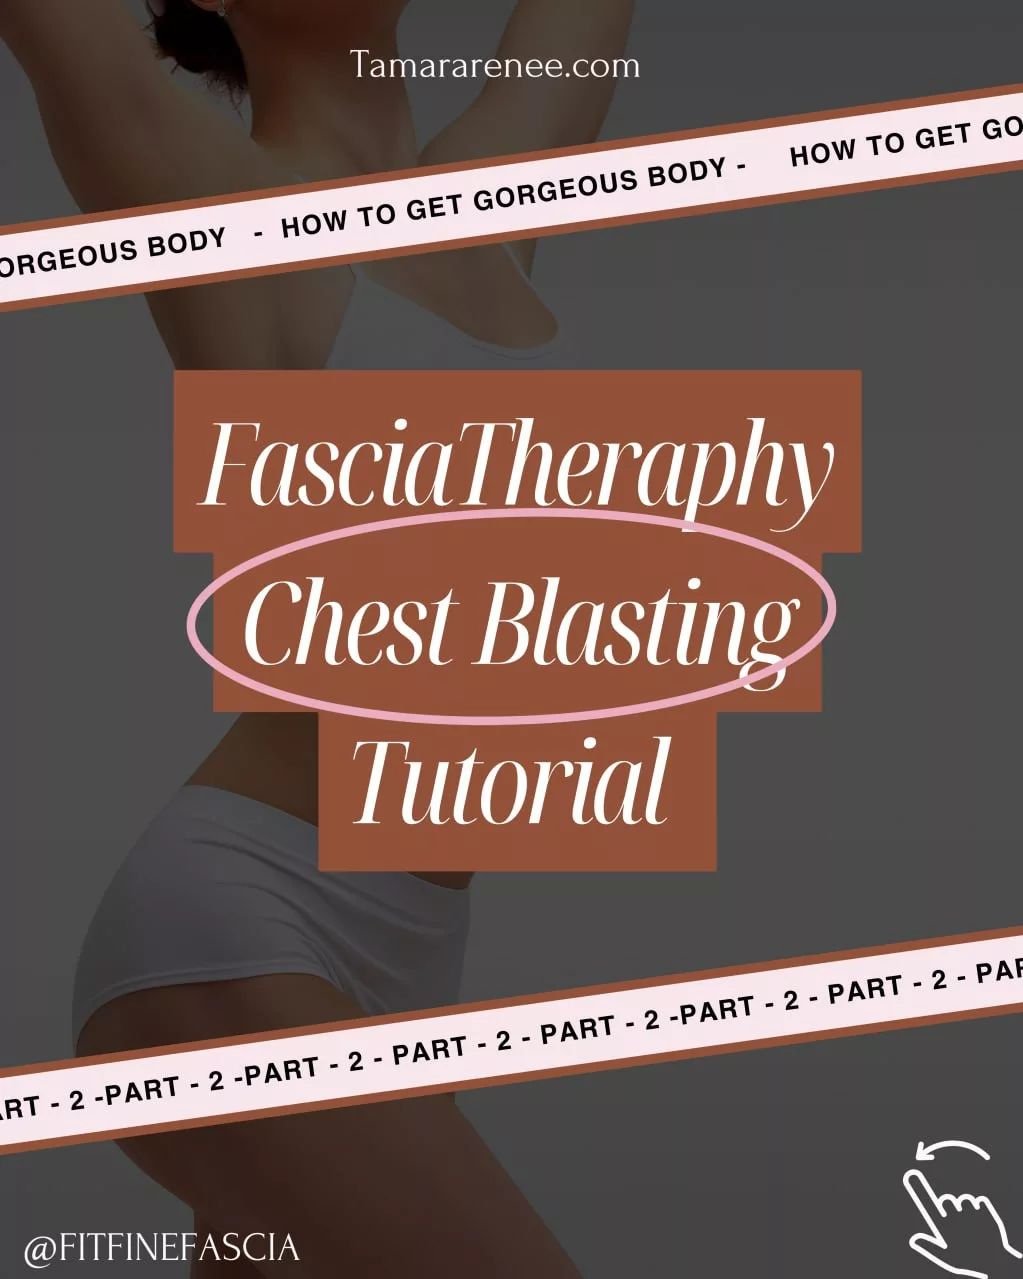 &quot;Embrace Your Glow: FasciaTherapy Essentials Part 2! 🌟

Join me, Tamara Renee, for the first part of our transformative FasciaTherapy series! In this practical tutorial, we'll focus on essential techniques from chest to hips using FasciaBlaster